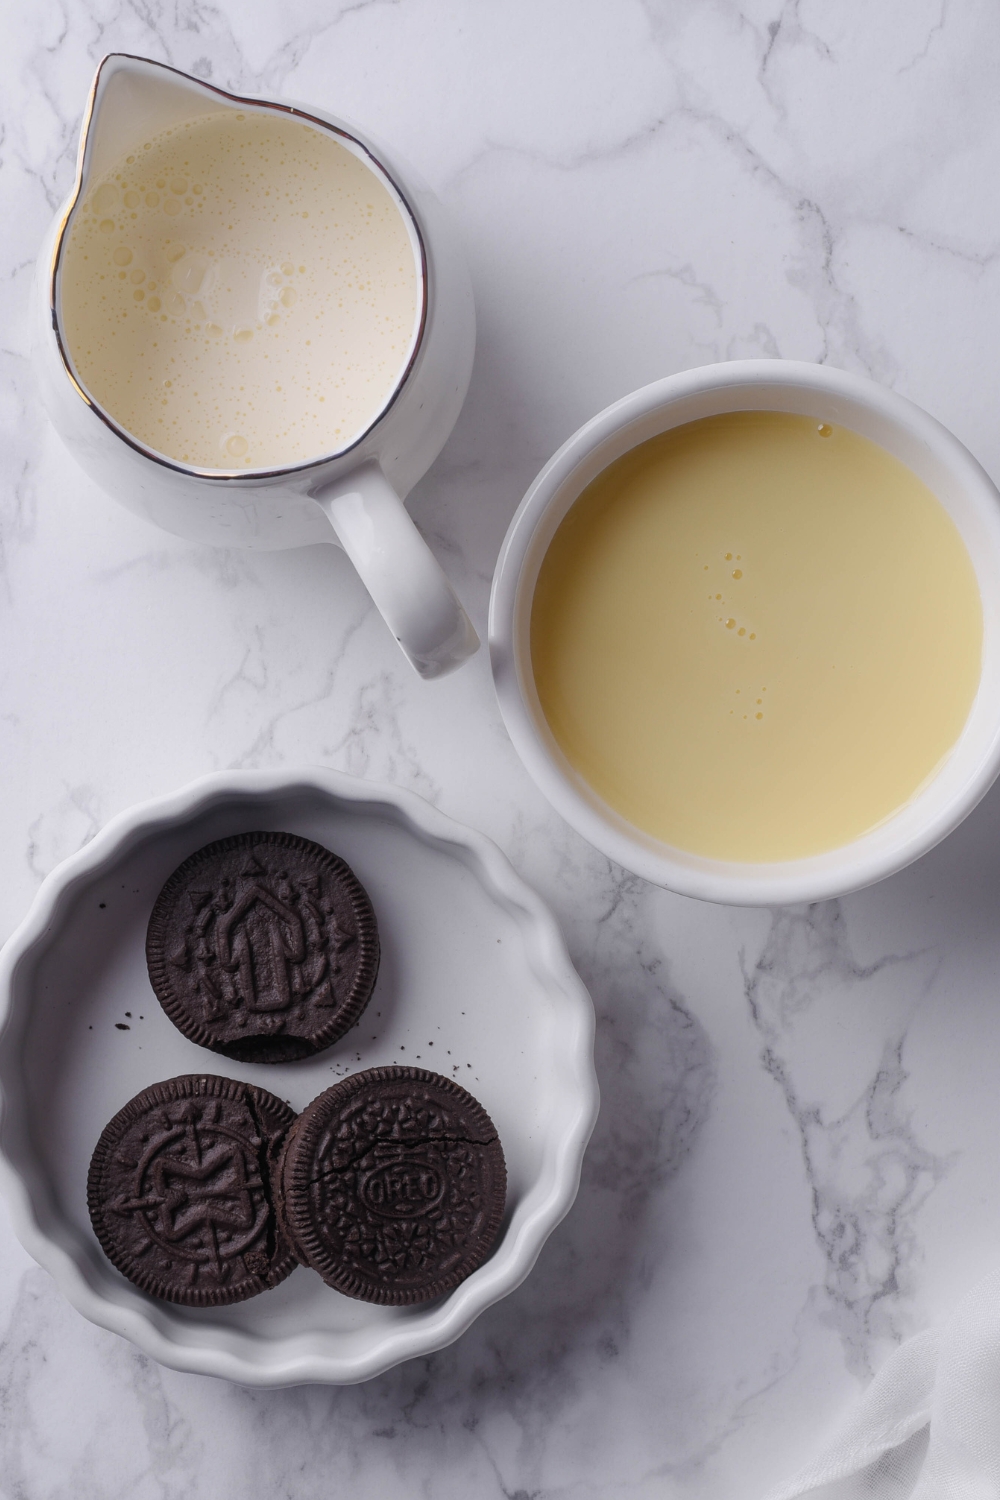 An overhead view of a pitcher with heavy cream, a small bowl with sweetened condensed milk, and a small bowl with 3 oreos in it.